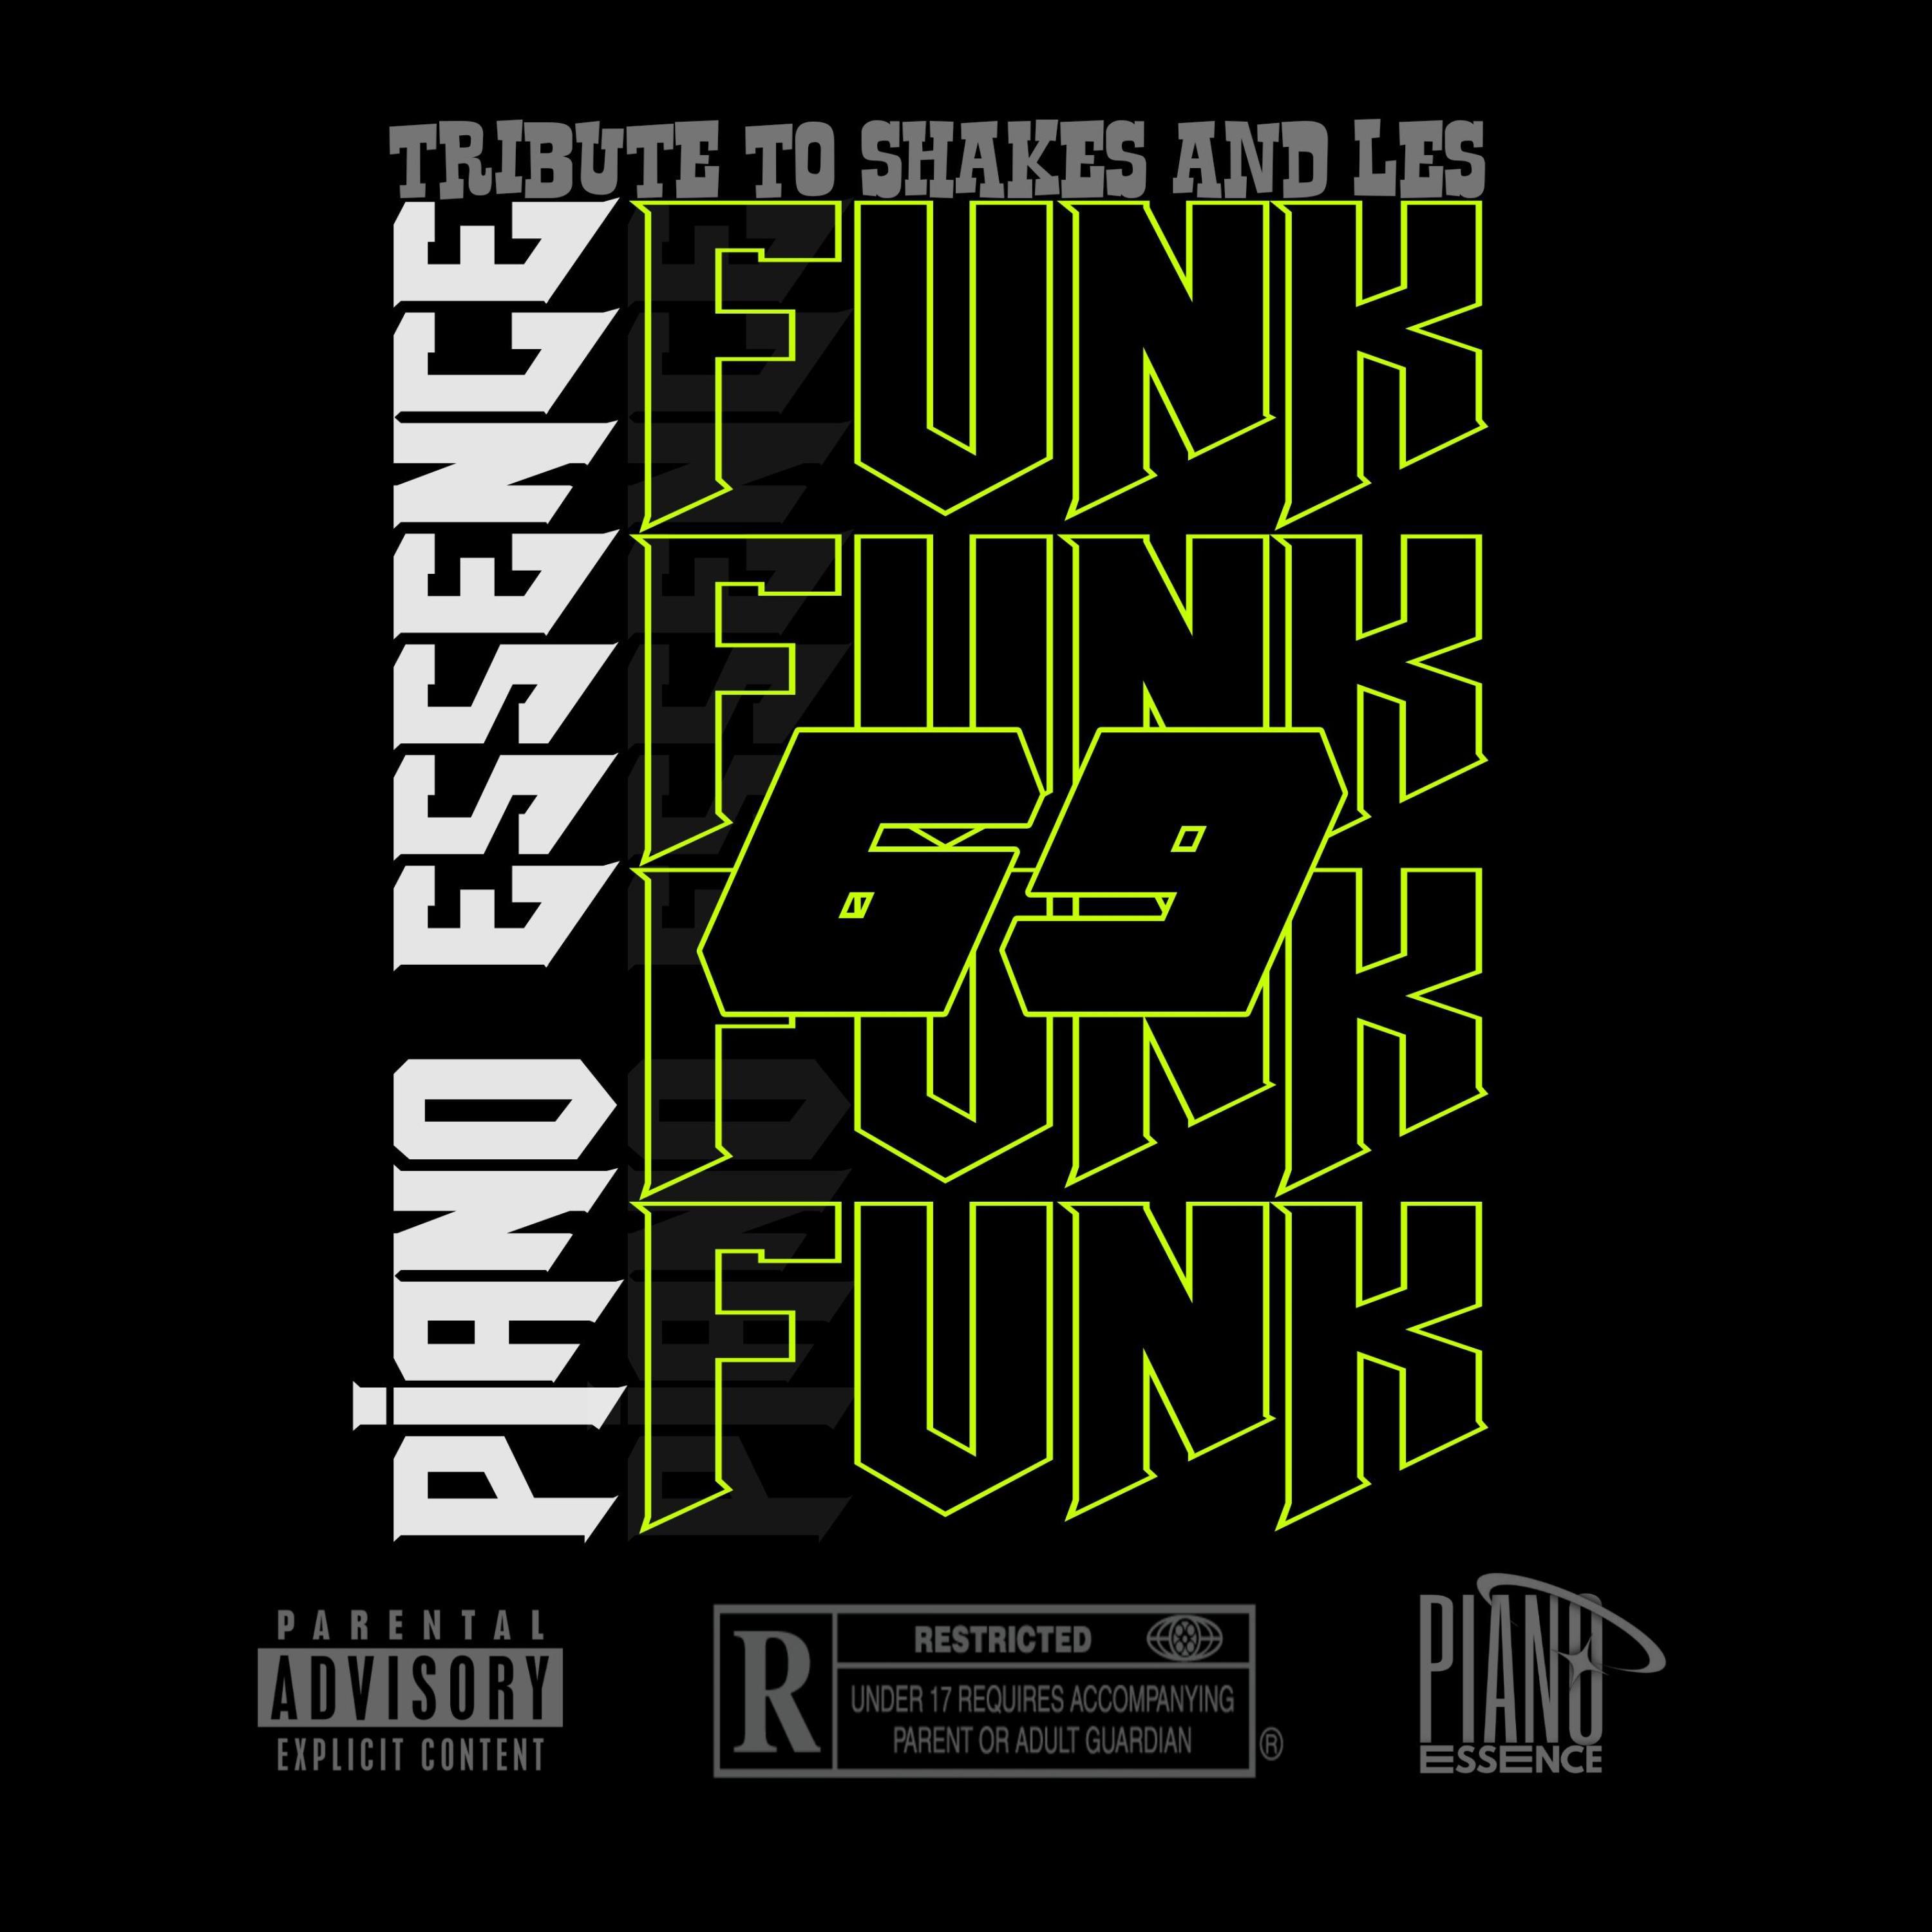 PIANO ESSENCE - Funk 69(Tribute To Shakes & Les)